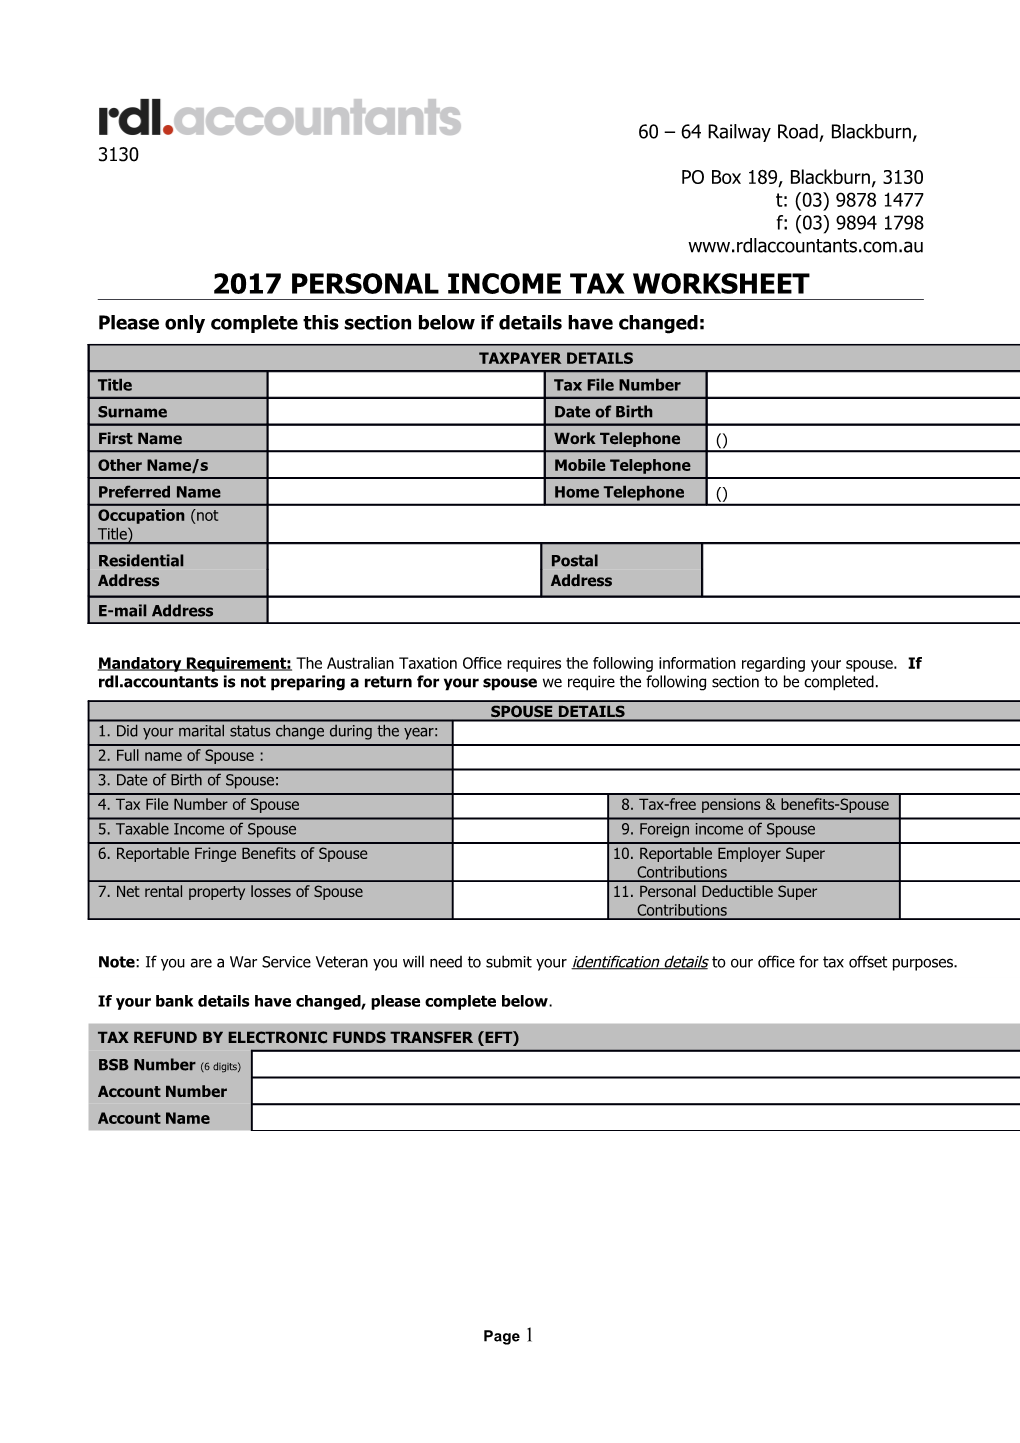 Personal Income Tax Worksheet 2003 s1